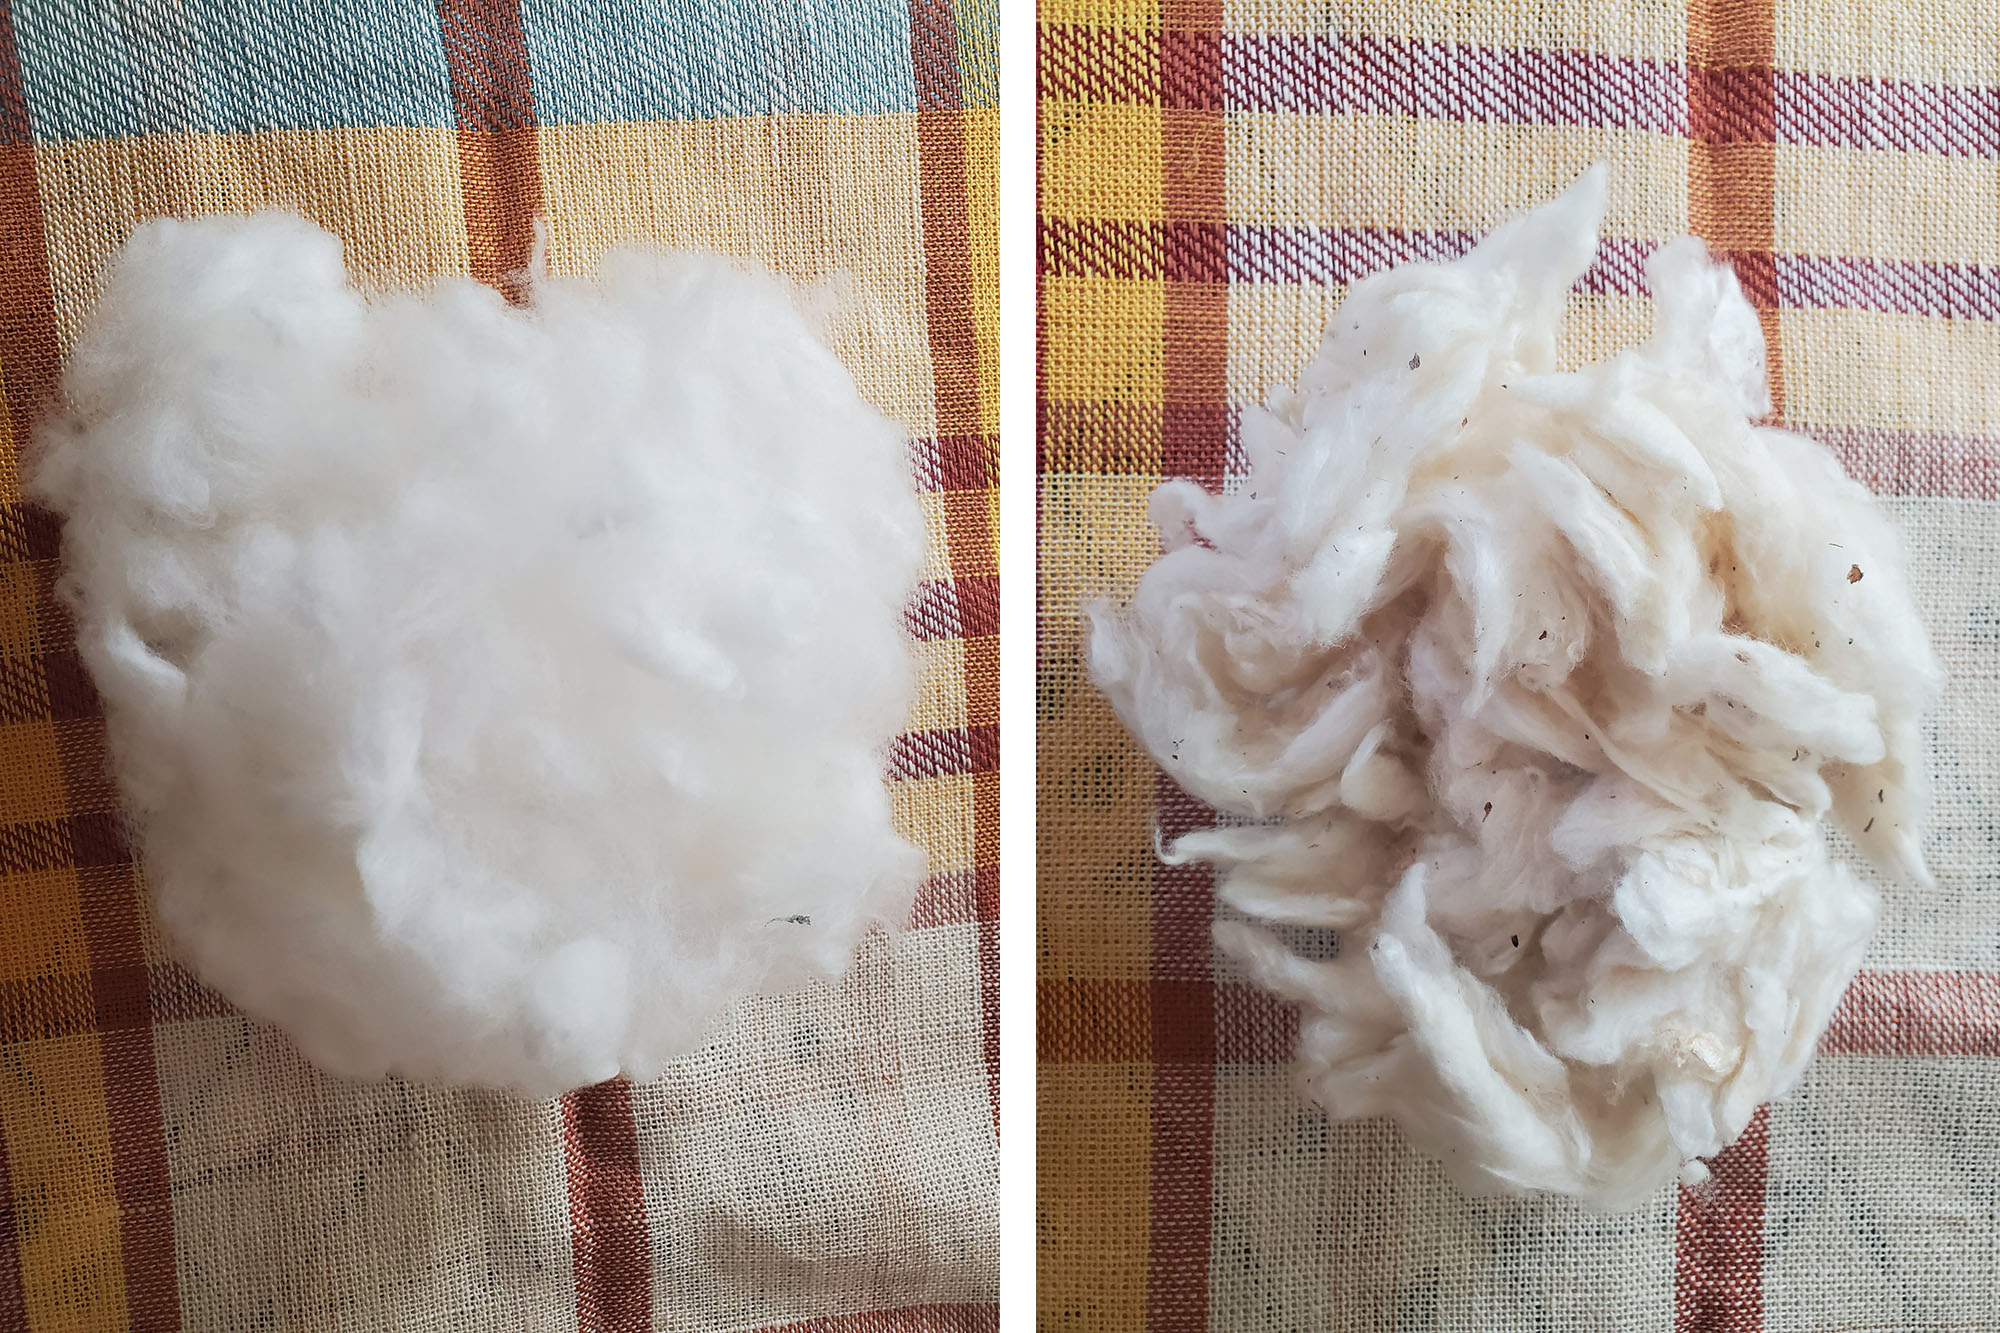 ginned cotton examples